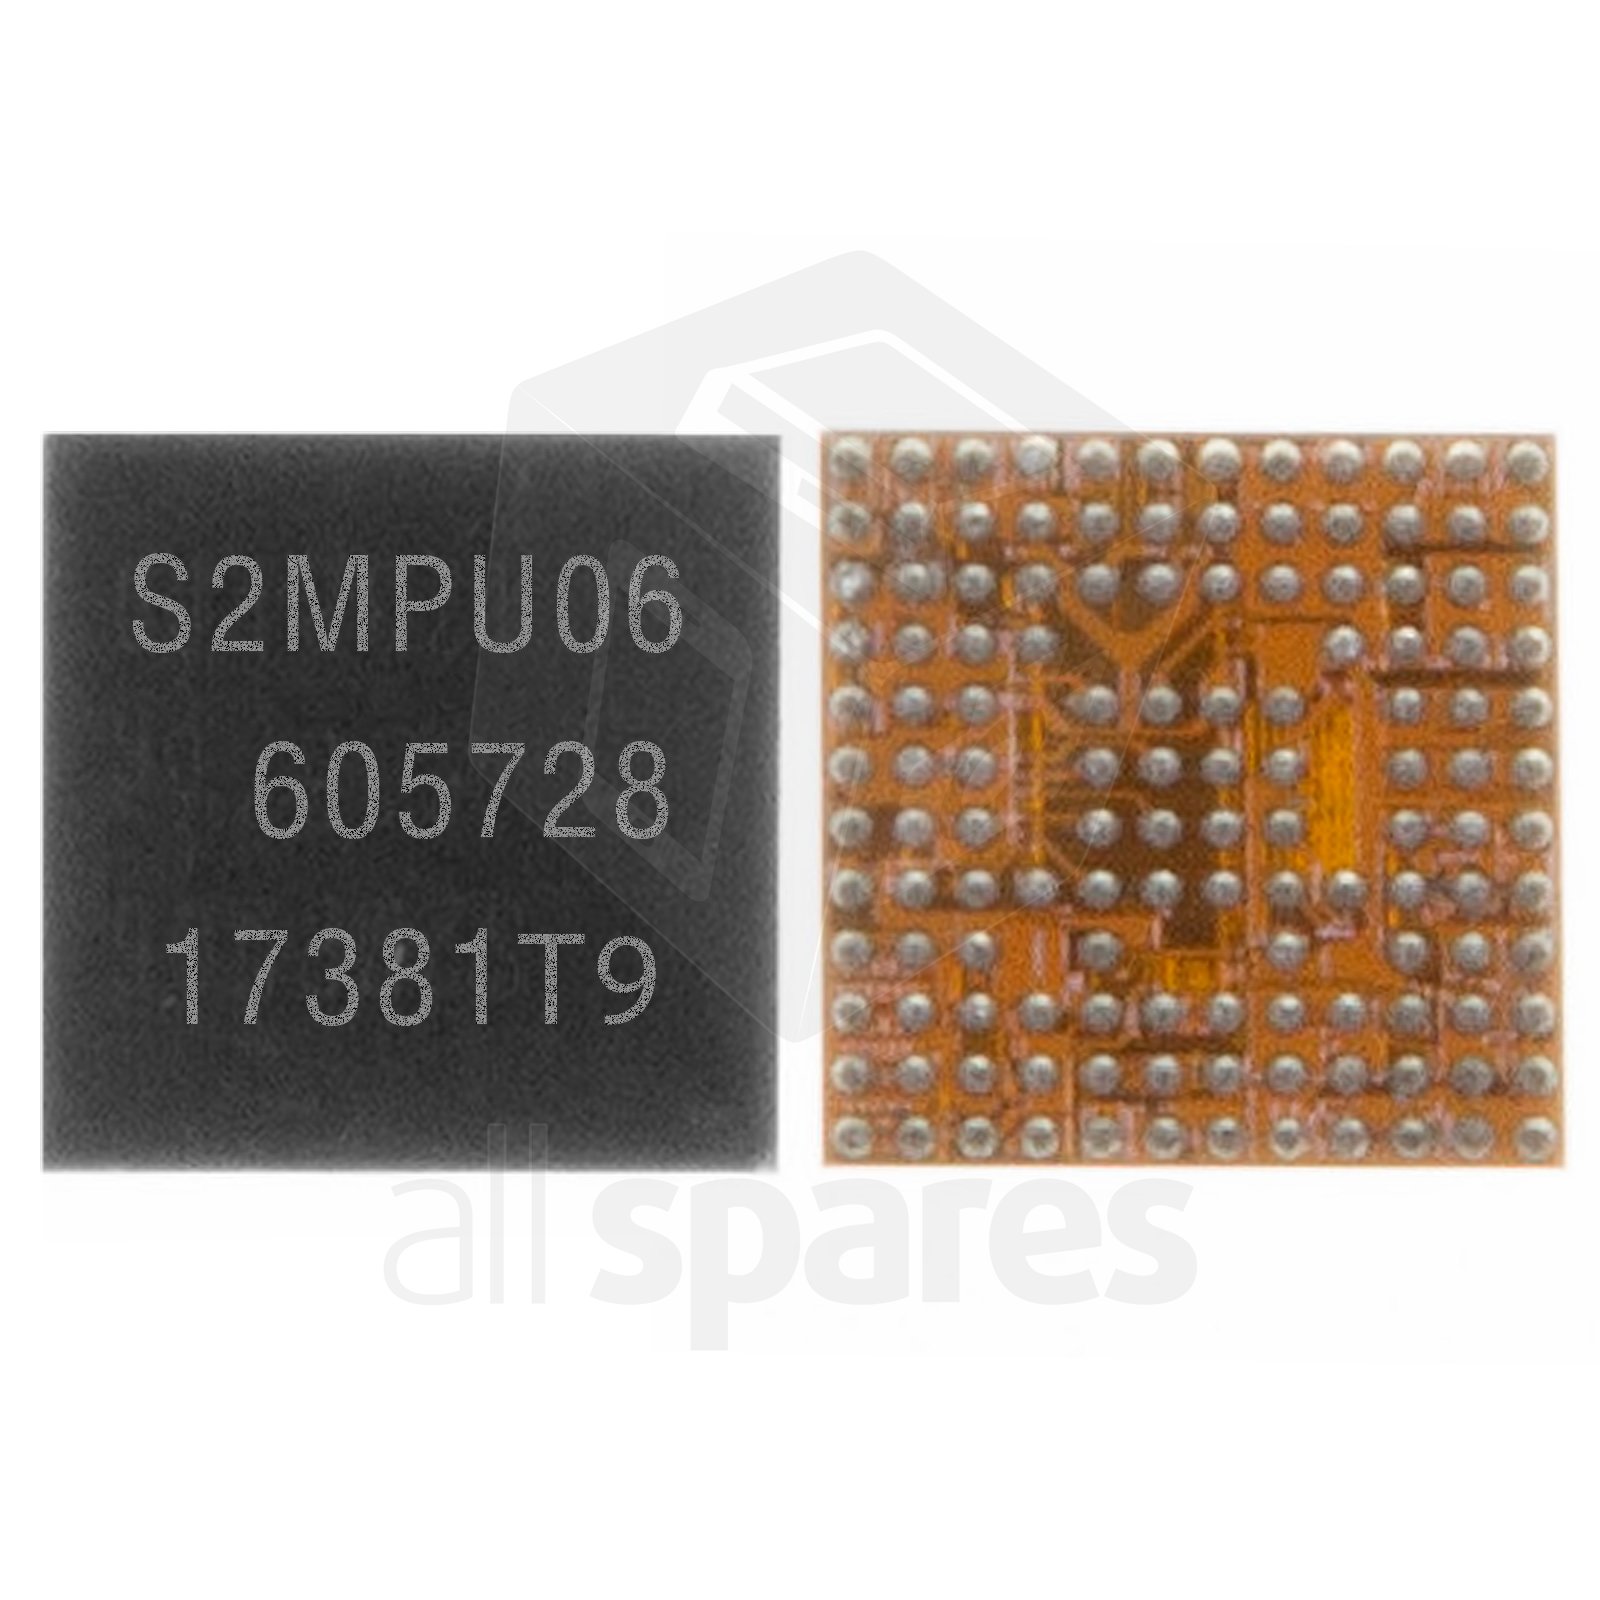 Power Control Ic S2mpu06 Compatible With Samsung G570f Ds Galaxy J5 Prime J330f Galaxy J3 17 J710f Galaxy J7 16 All Spares